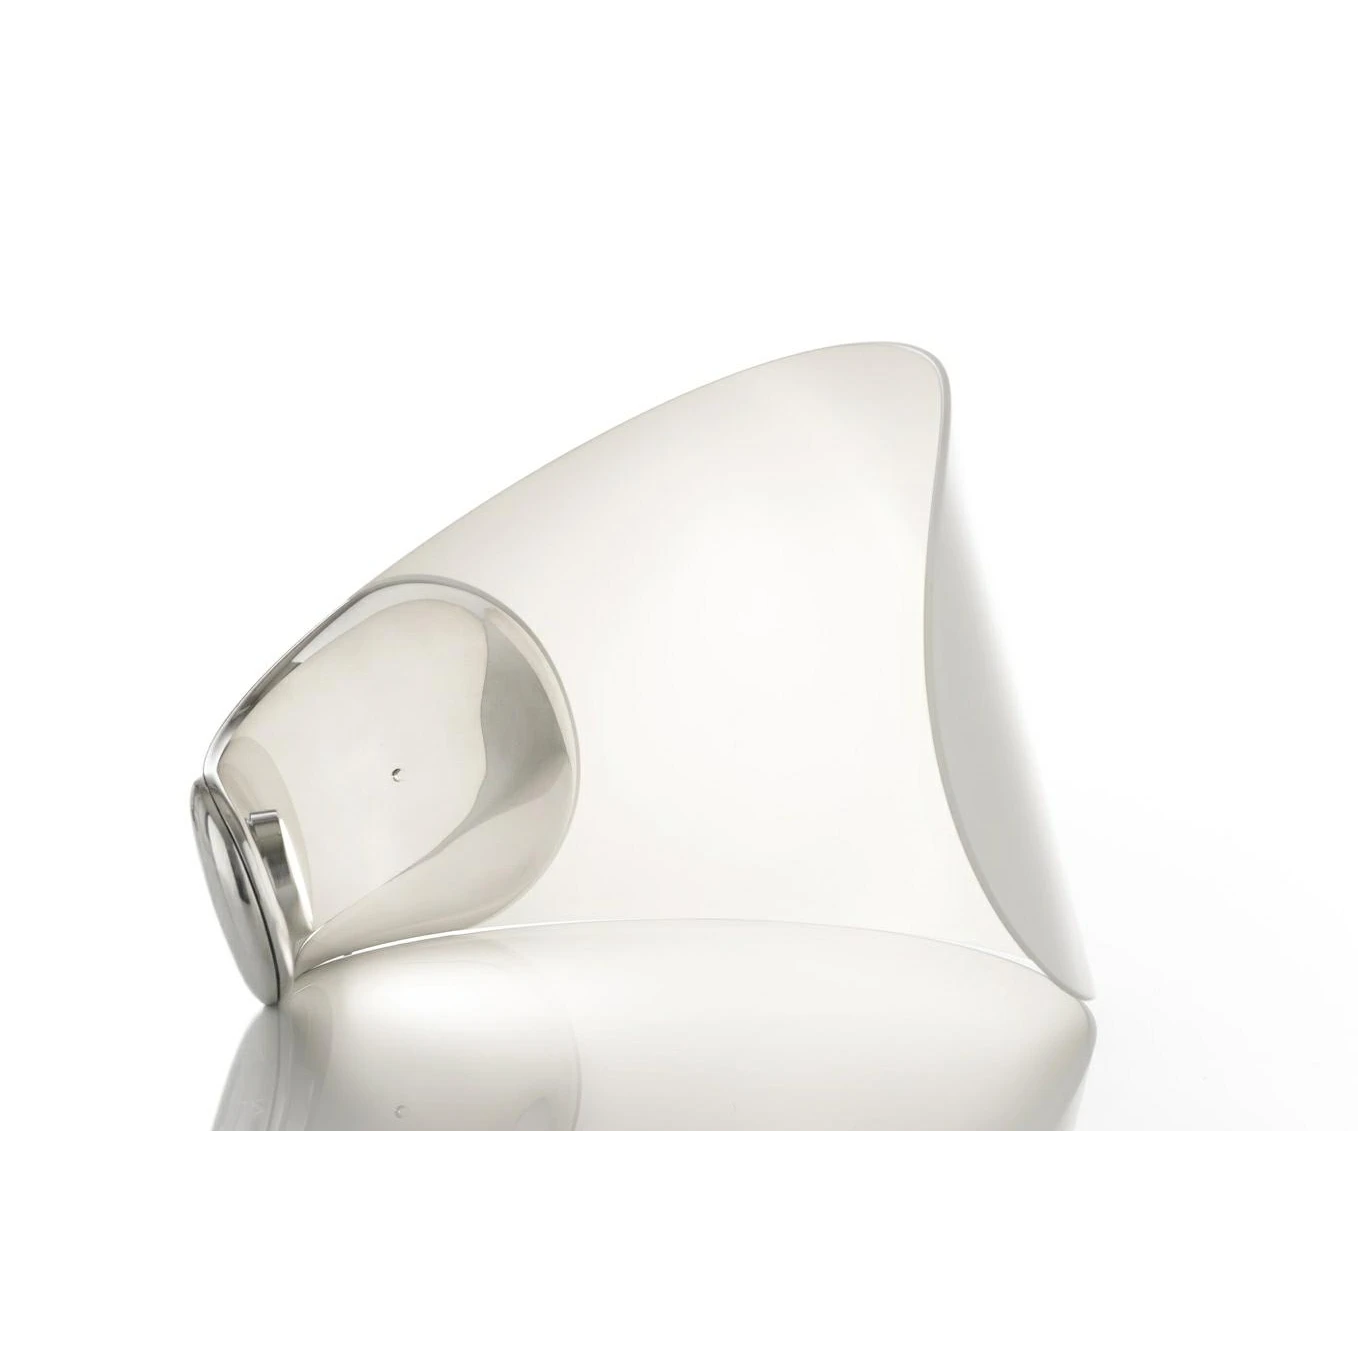 Curl Table Lamp White Buy here